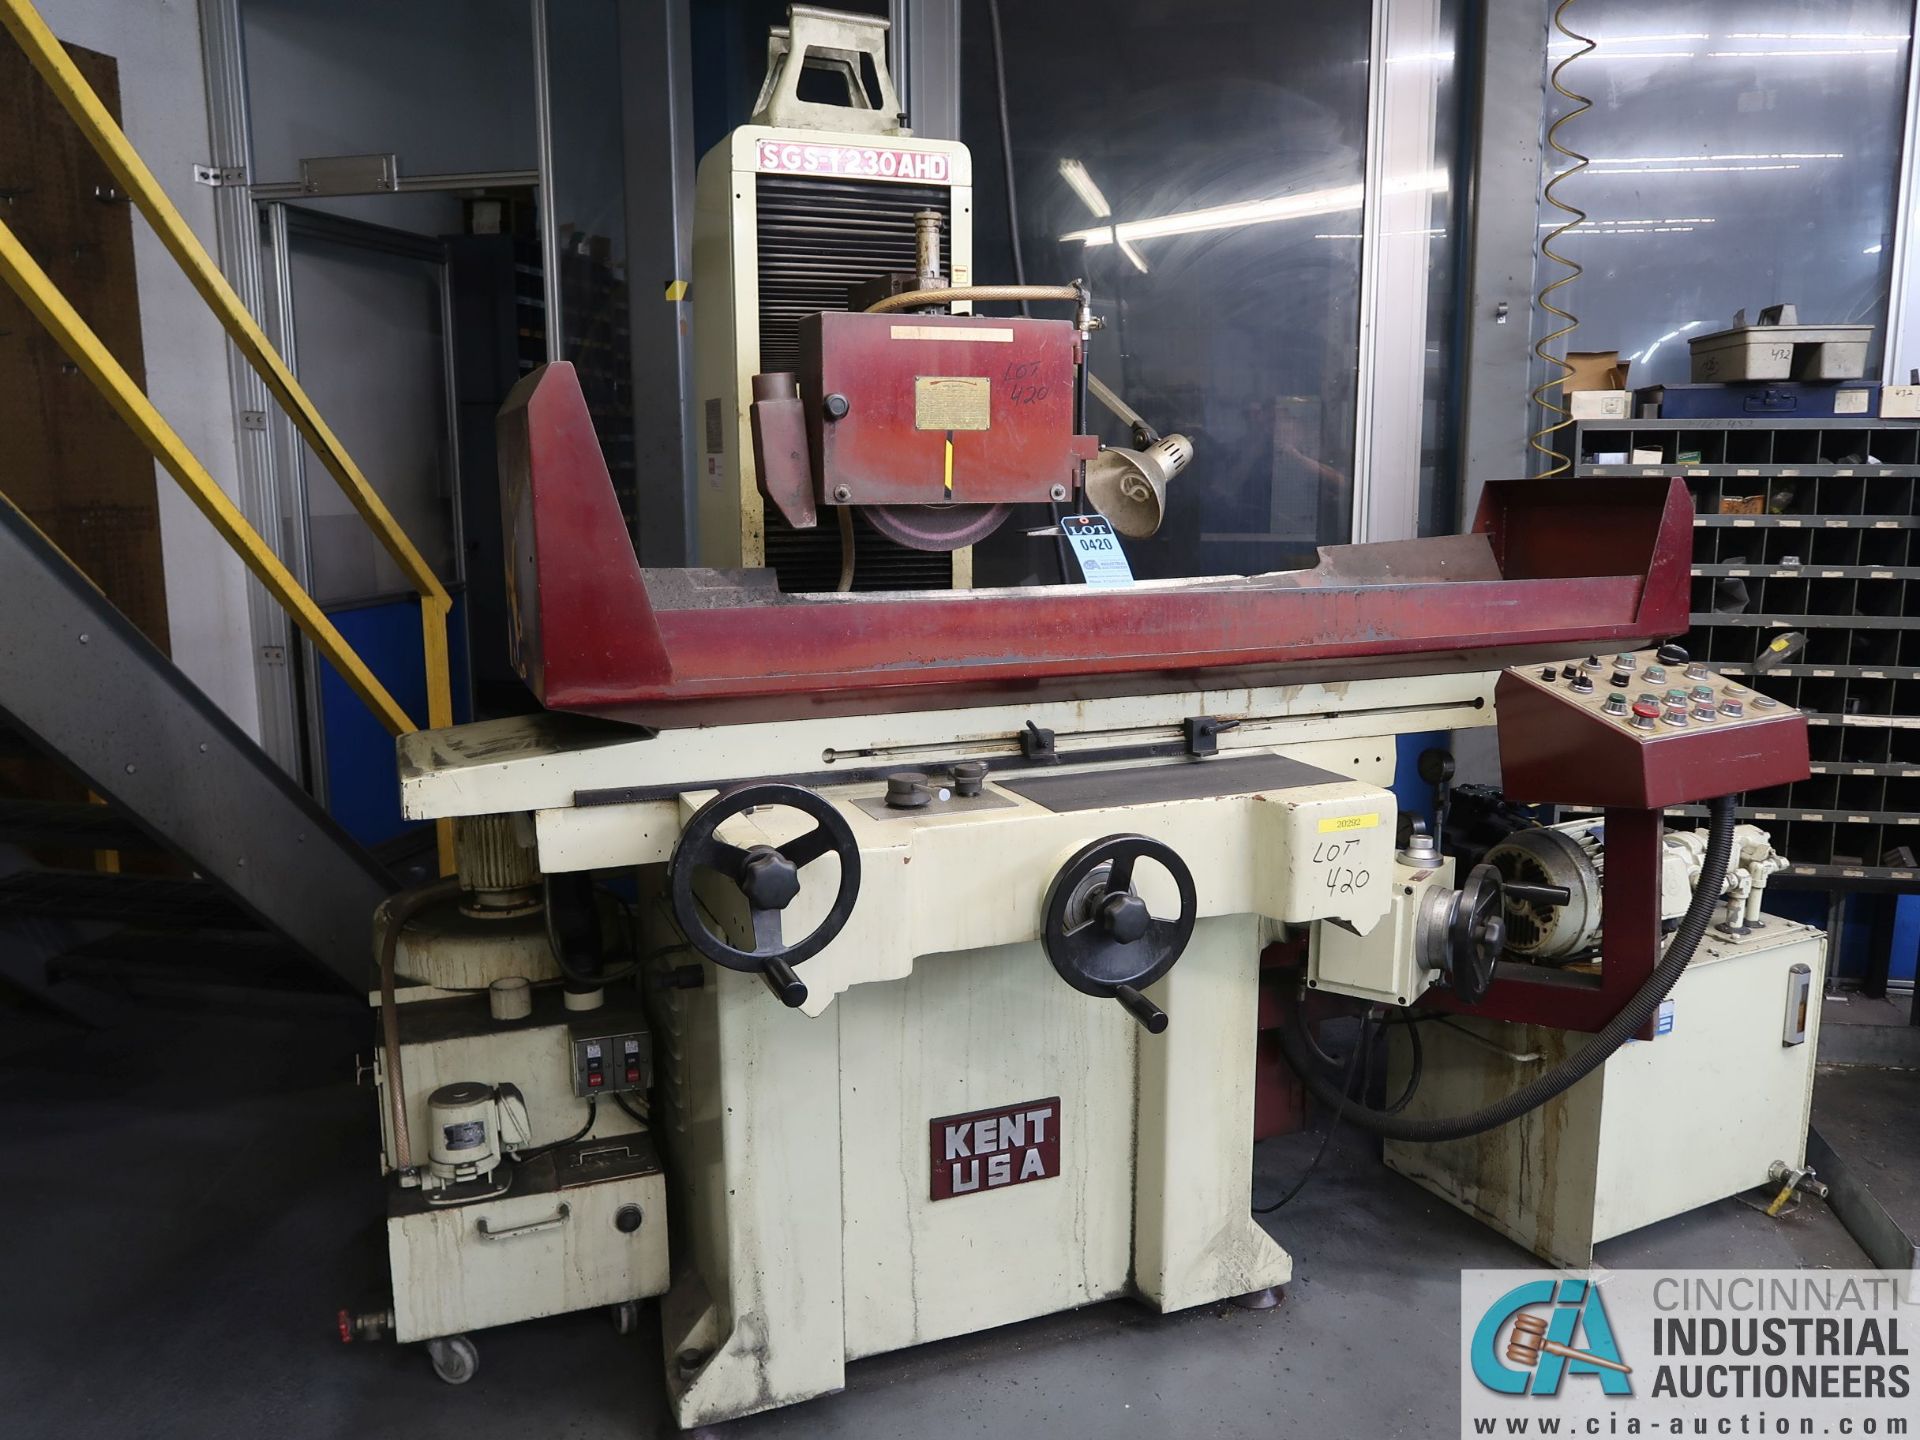 12" X 30" KENT MODEL SGS1250AHD HYDRAULIC SURFACE GRINDER; S/N 9110, WITH 12" X 28" KANETSU MAGNETIC